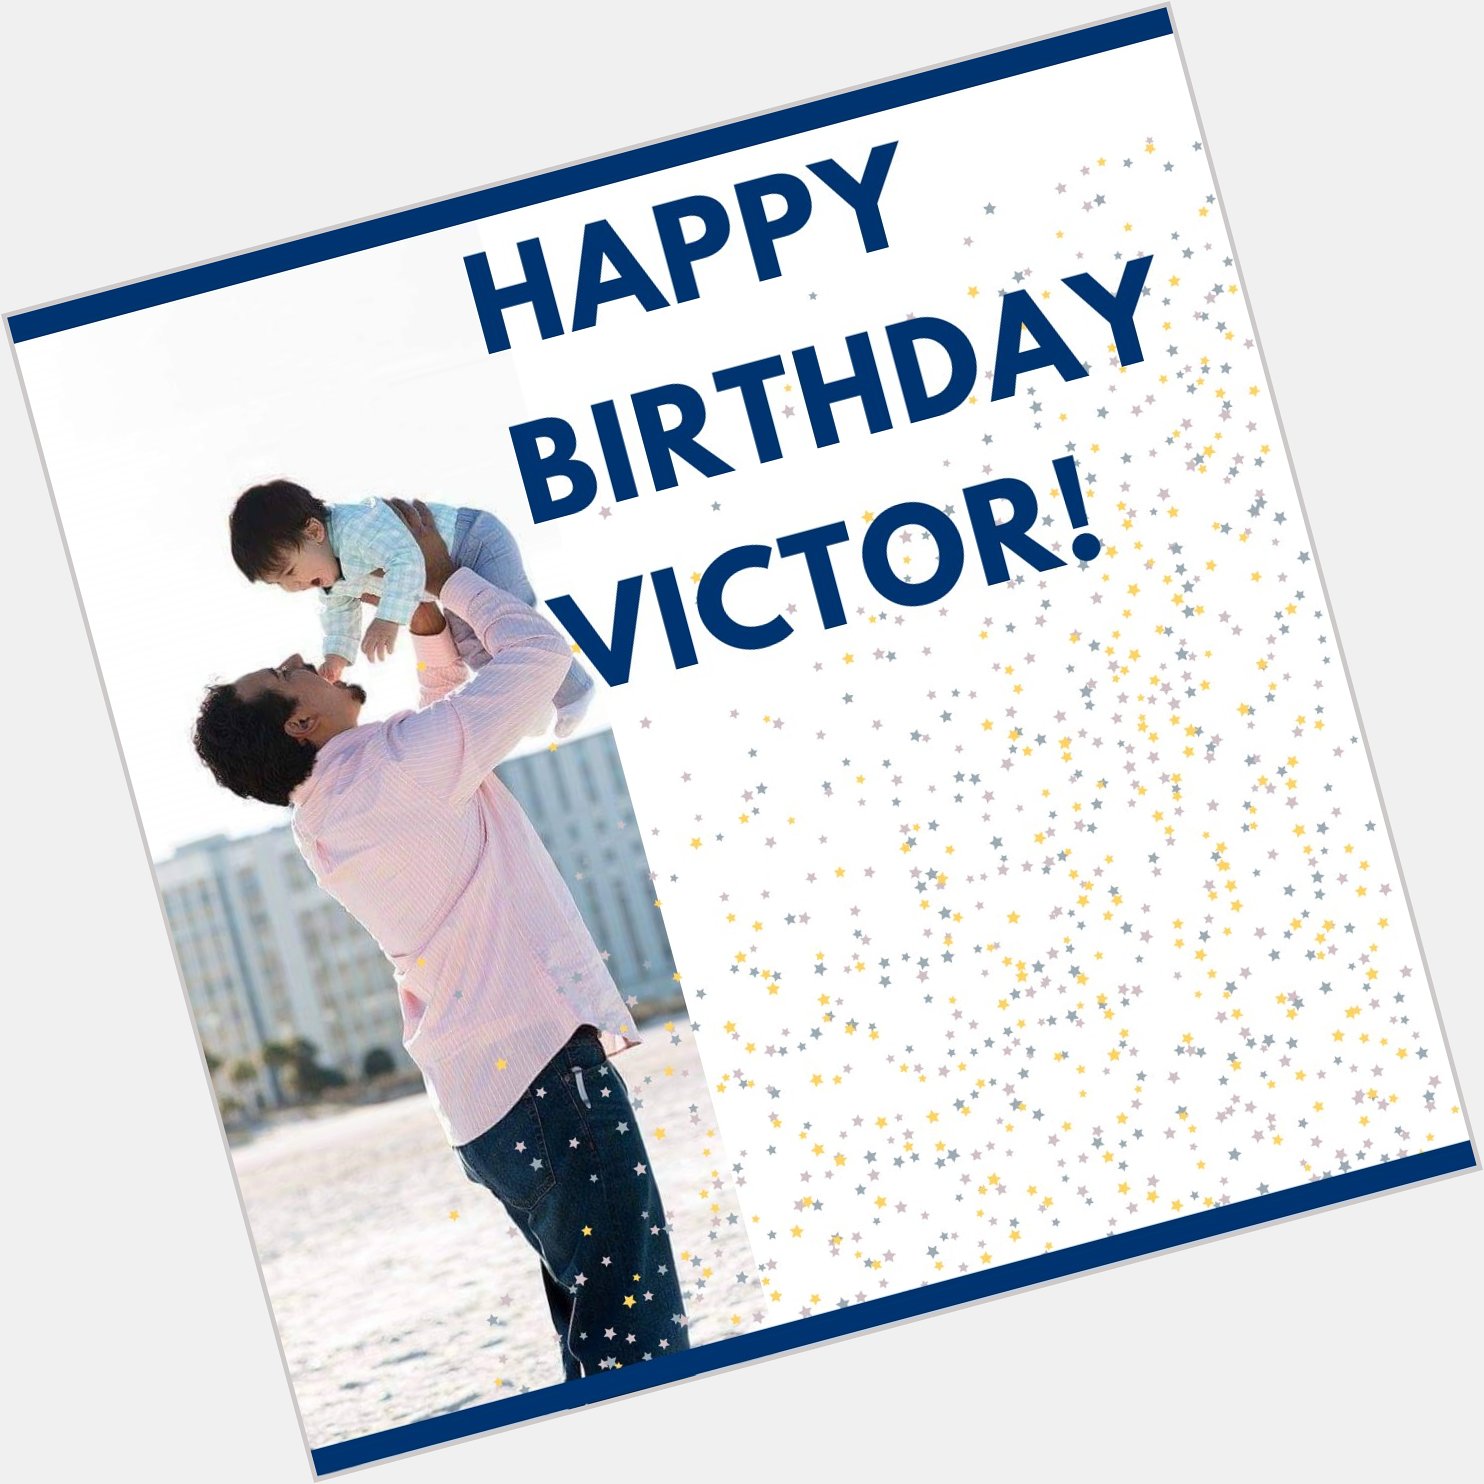 Victor Gonzalez is one of our service technicians in Chattanooga and today is his birthday! Happy Birthday, Victor! 